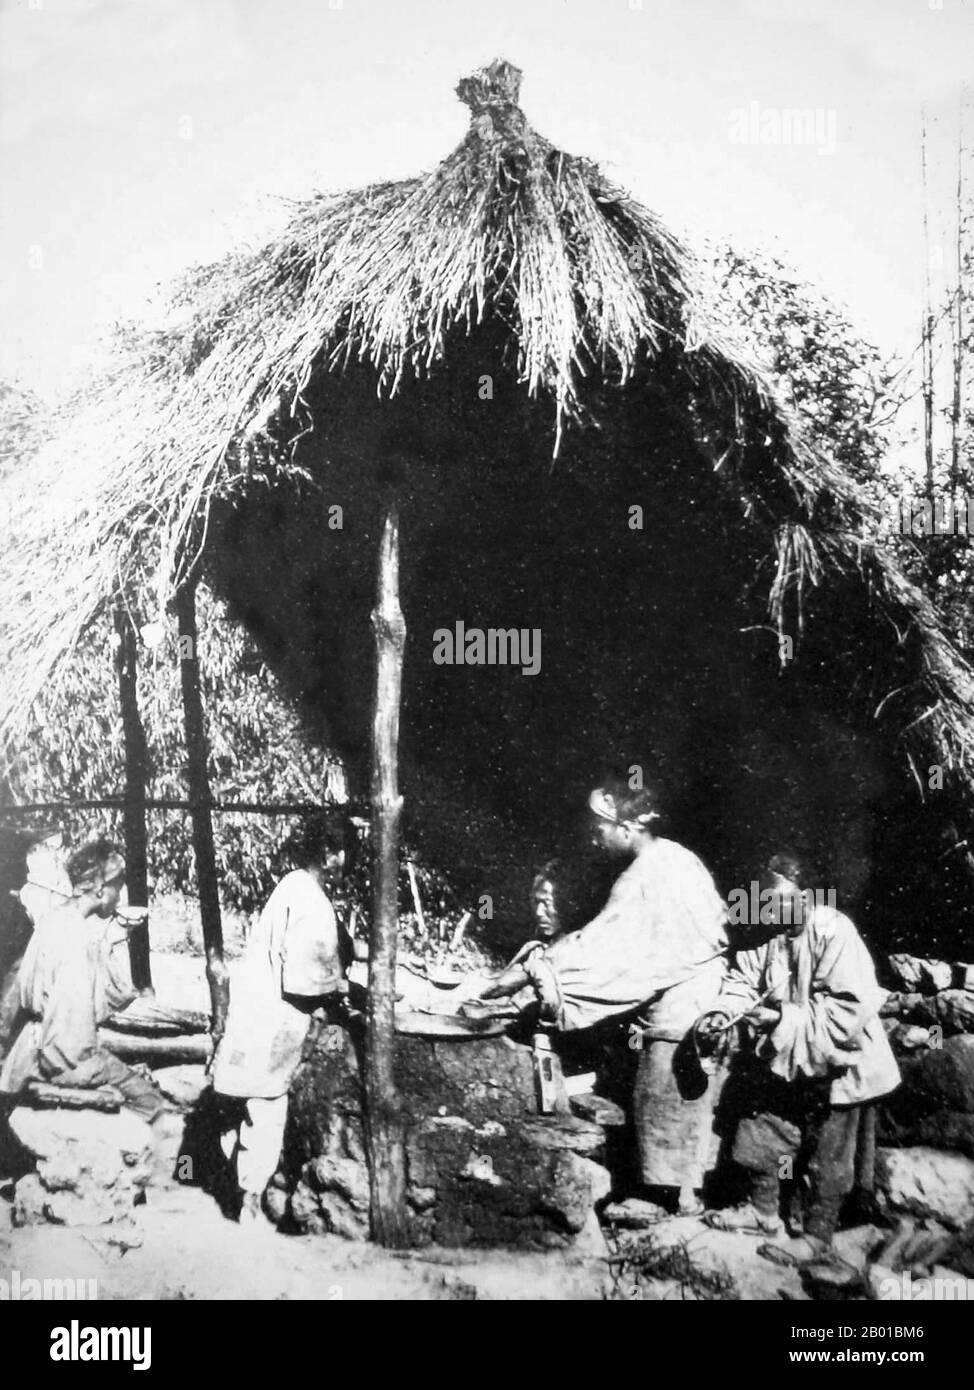 China: A simple restaurant by the Tea Horse Road in western Yunnan, c. 1900.  The Tea Horse Road (Cha Ma Dao) was a network of mule caravan paths winding through the mountains of Yunnan, Sichuan and Tibet in Southwest China. It is also sometimes referred to as the Southern Silk Road and Ancient Tea Horse Road. From around a thousand years ago, the Ancient Tea Route was a trade link from Yunnan, one of the first tea-producing regions, to India via Burma, to Tibet, and to central China via Sichuan Province. Stock Photo